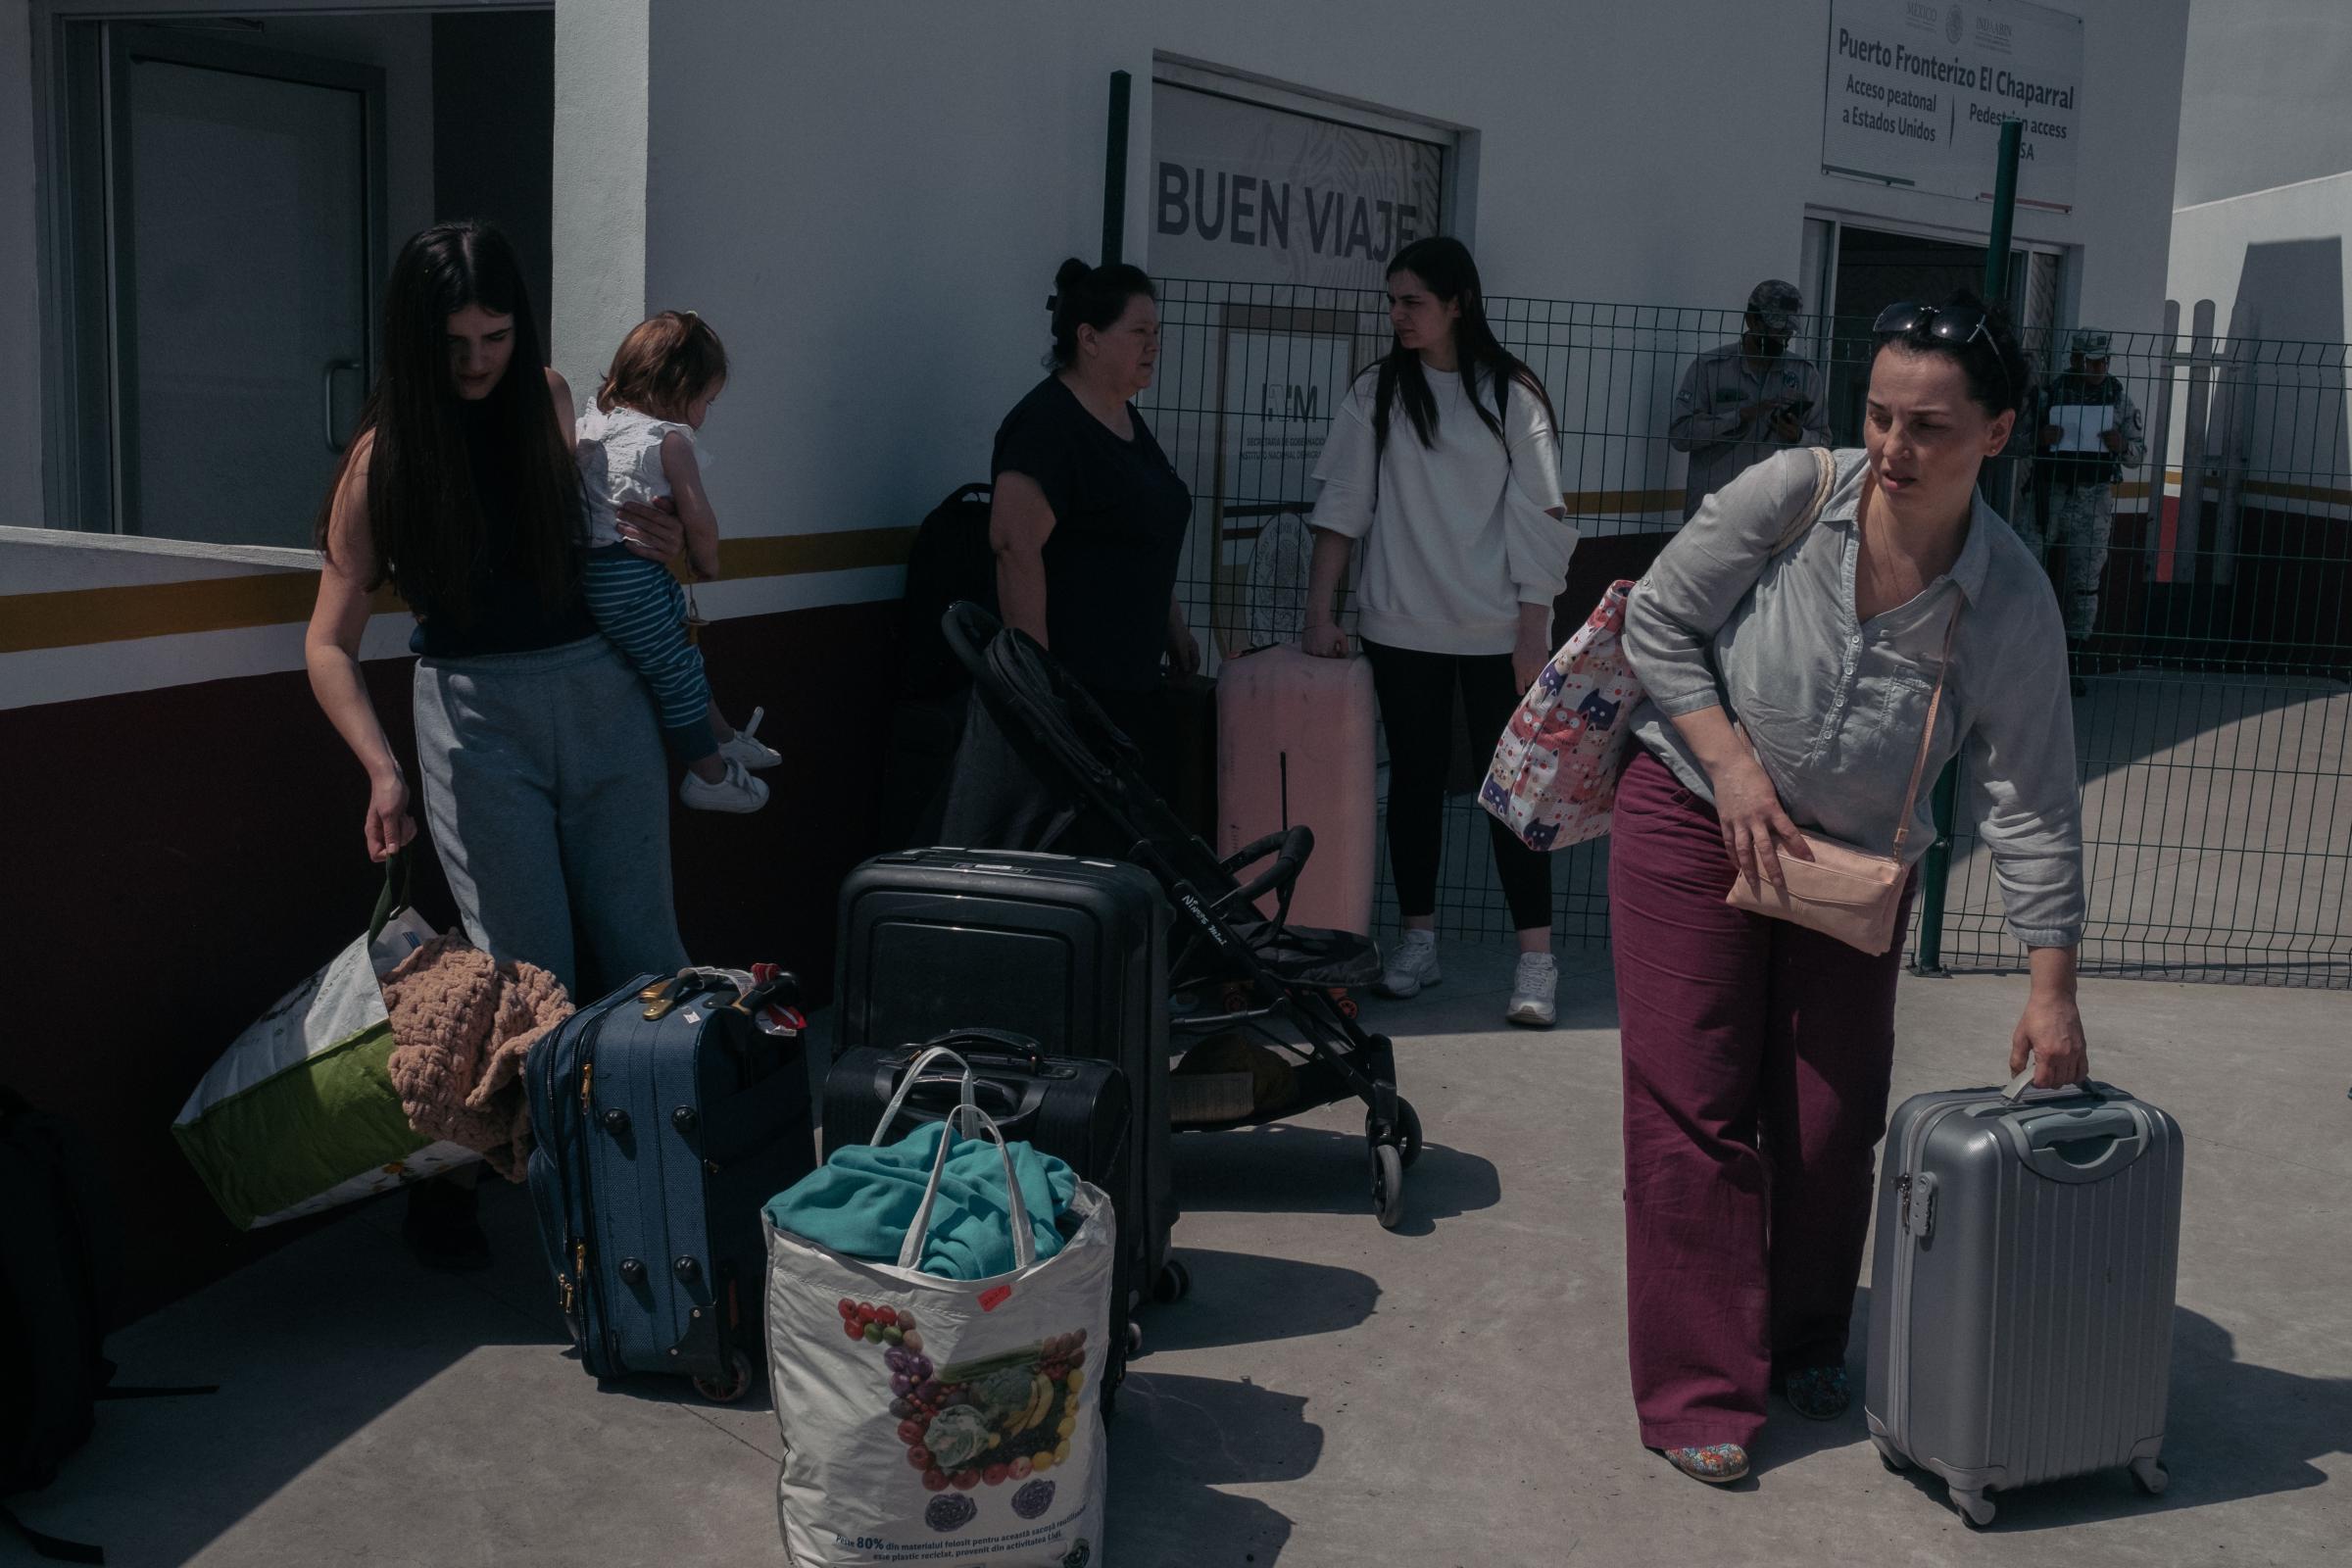 Le Monde - Ukrainian Refugees in Tijuana - Ukrainian refugees at the Chaparral border crossing in...